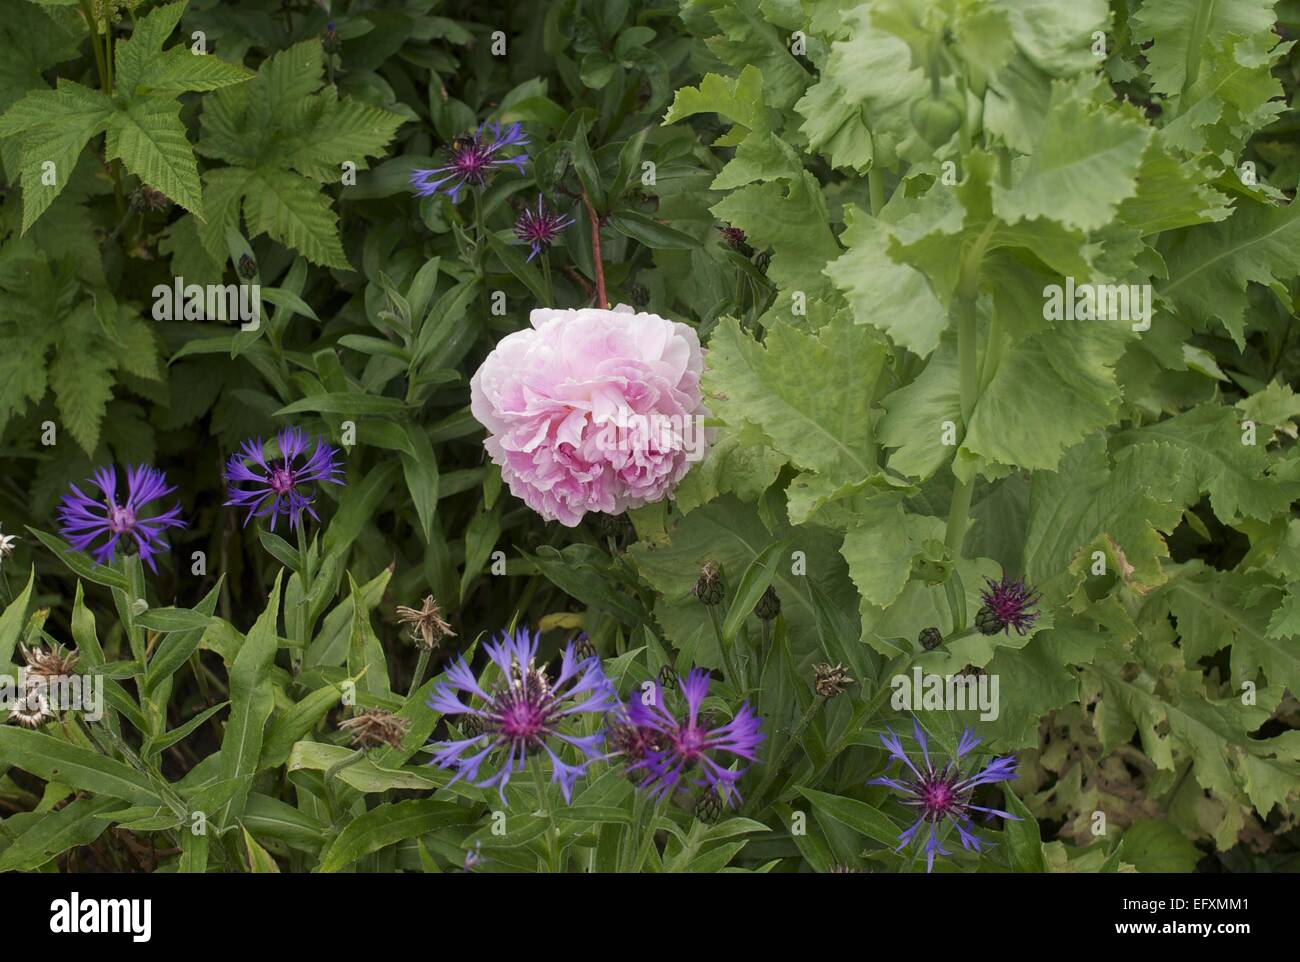 Pink Rose and blue Squarrose Knapweed or Cornflower Stock Photo